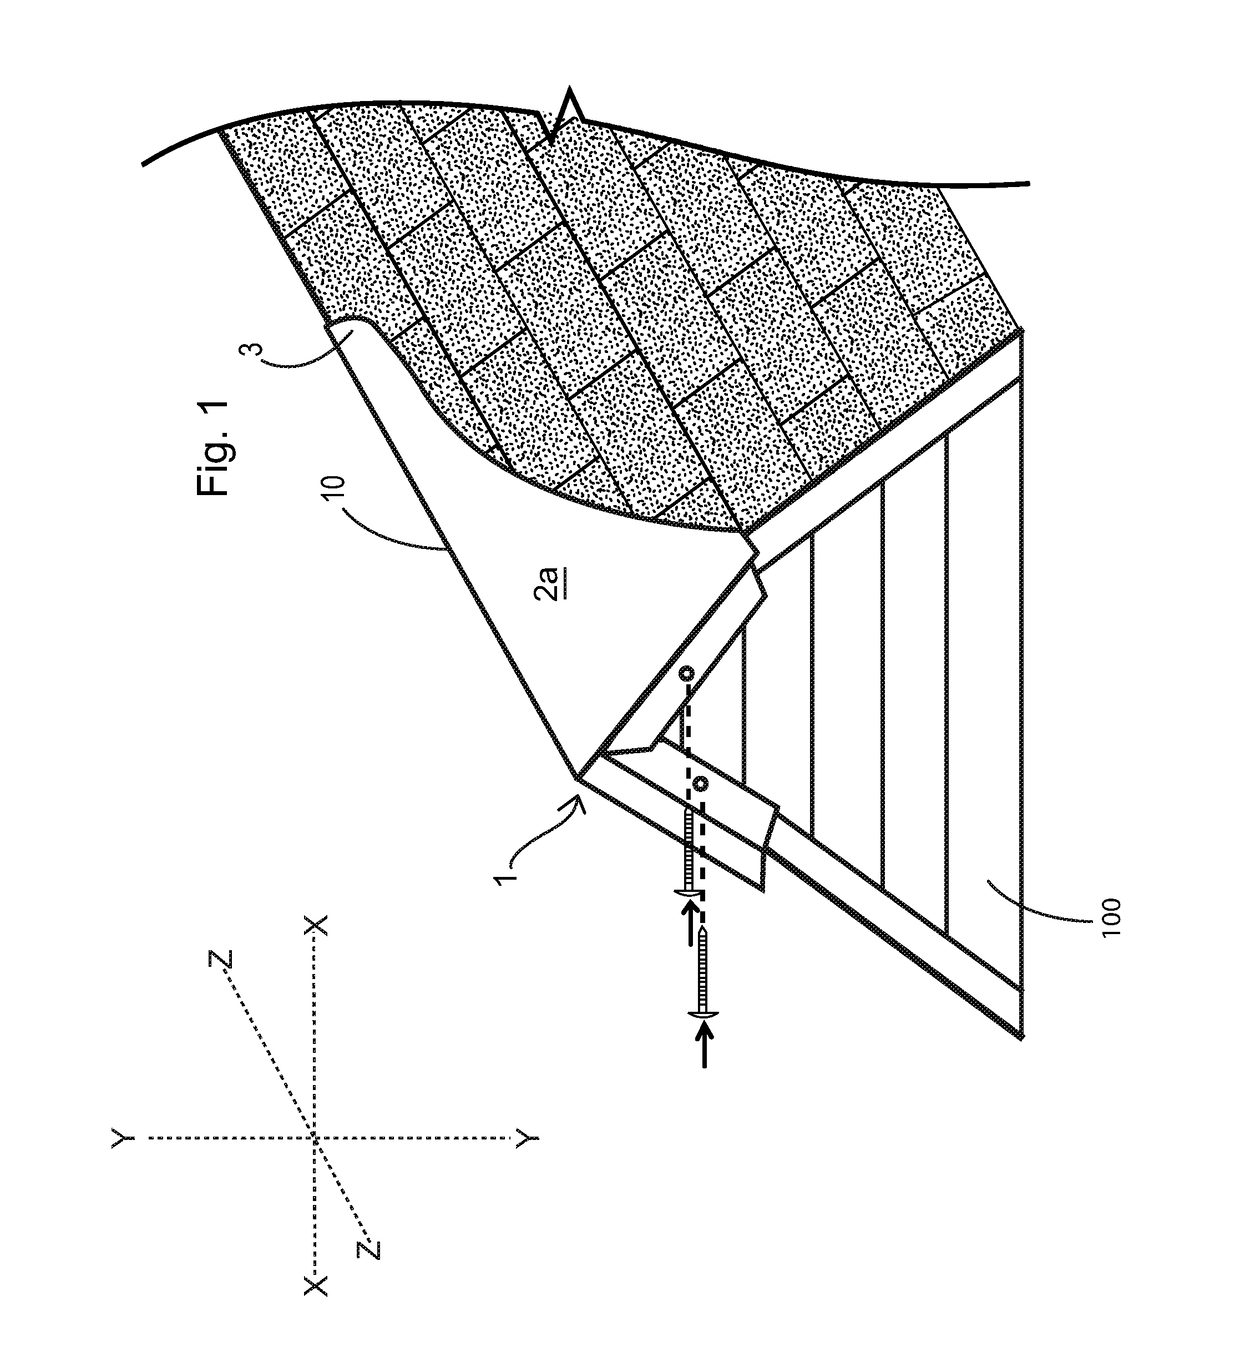 Protective cap for gable end of roof ridge